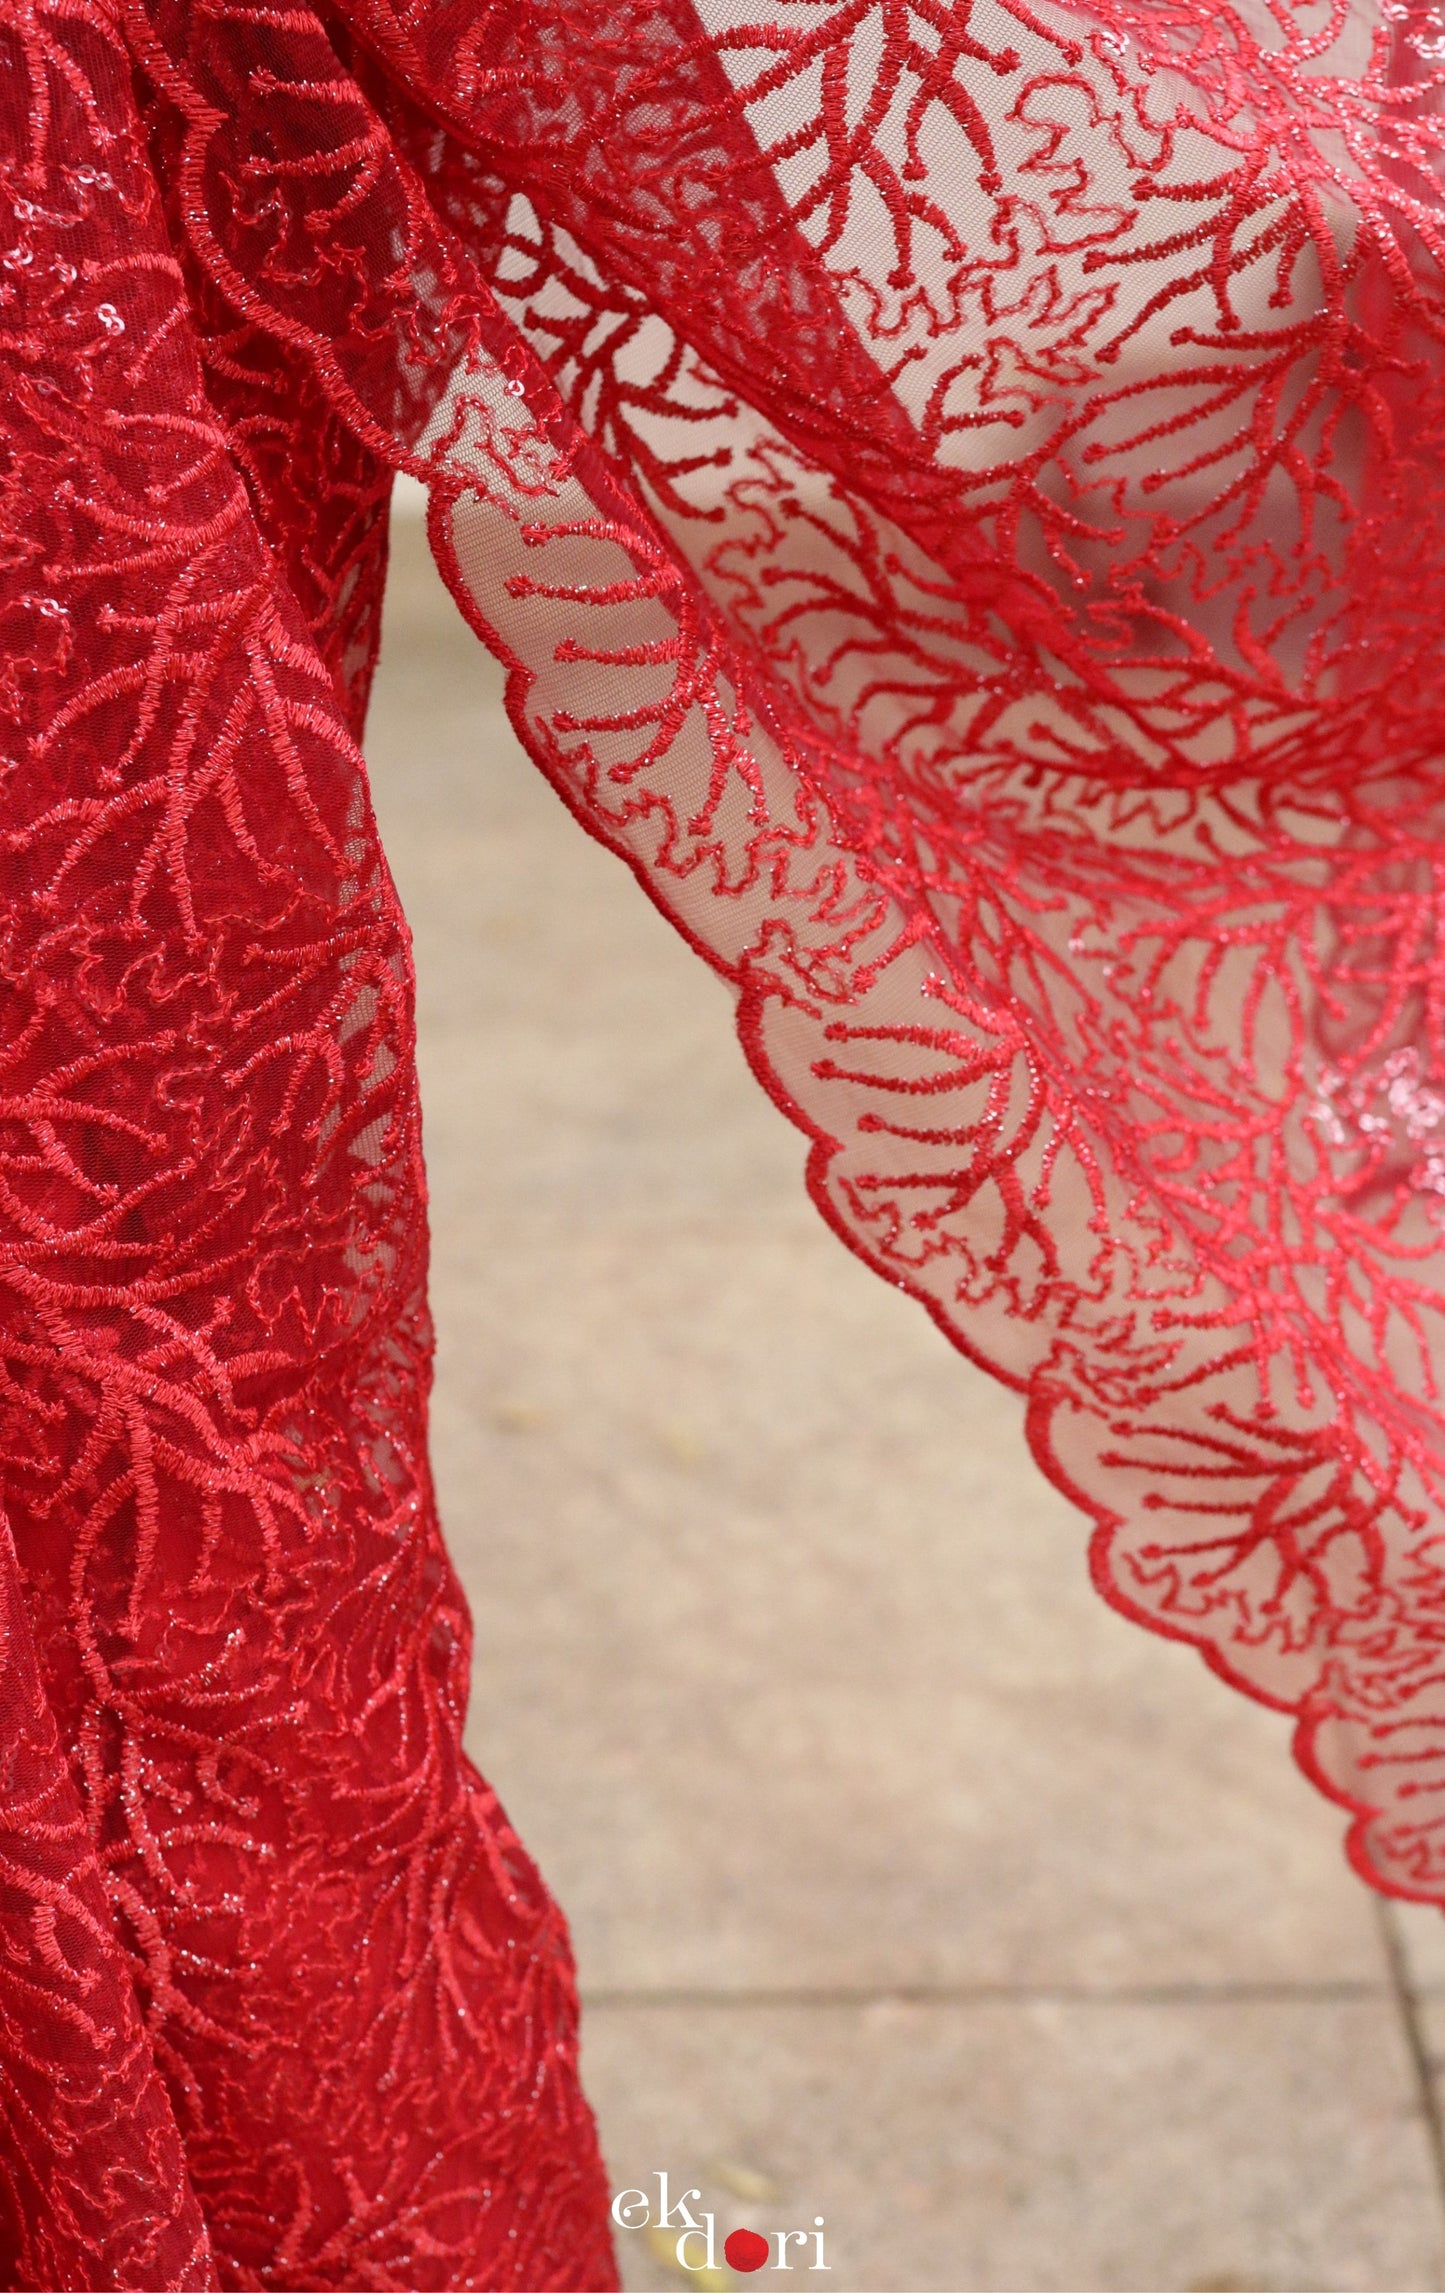 Statement Cocktail Net And Lace Red Saree : Lady In Red Net Lace Saree